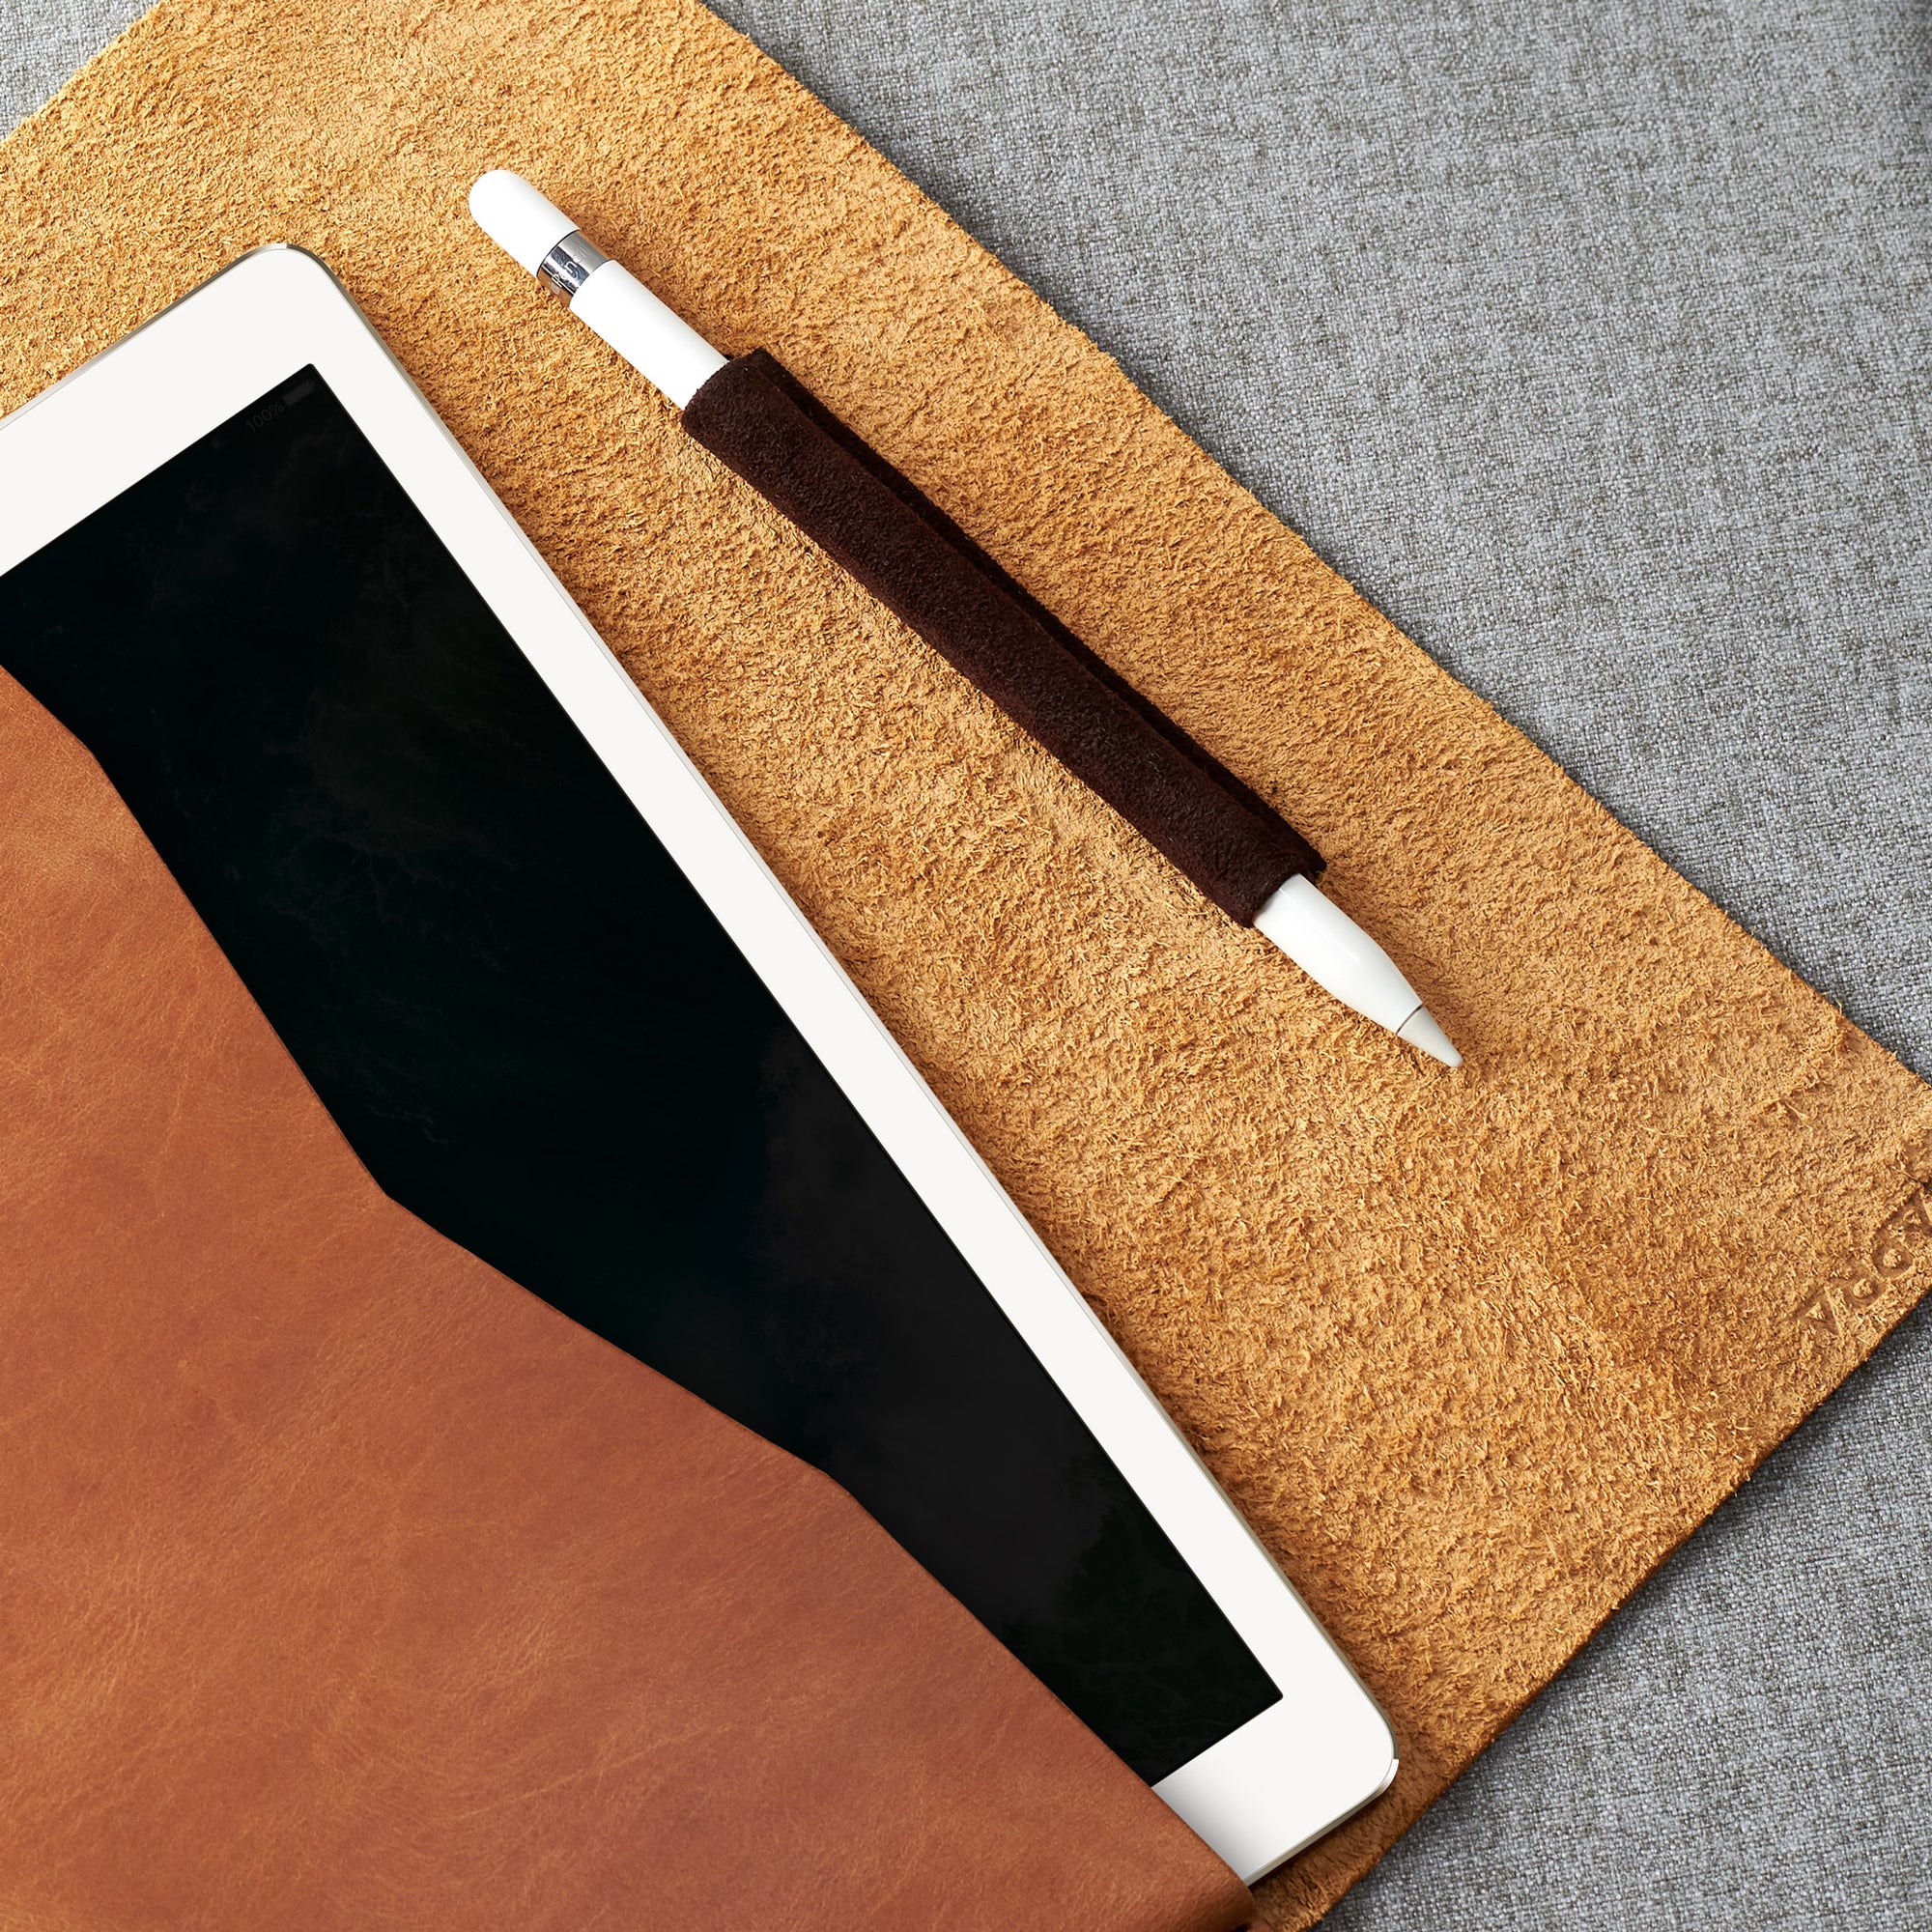 Apple Pencil Holder. iPad Sleeve. Leather Case Tan for iPad by Capra Leather